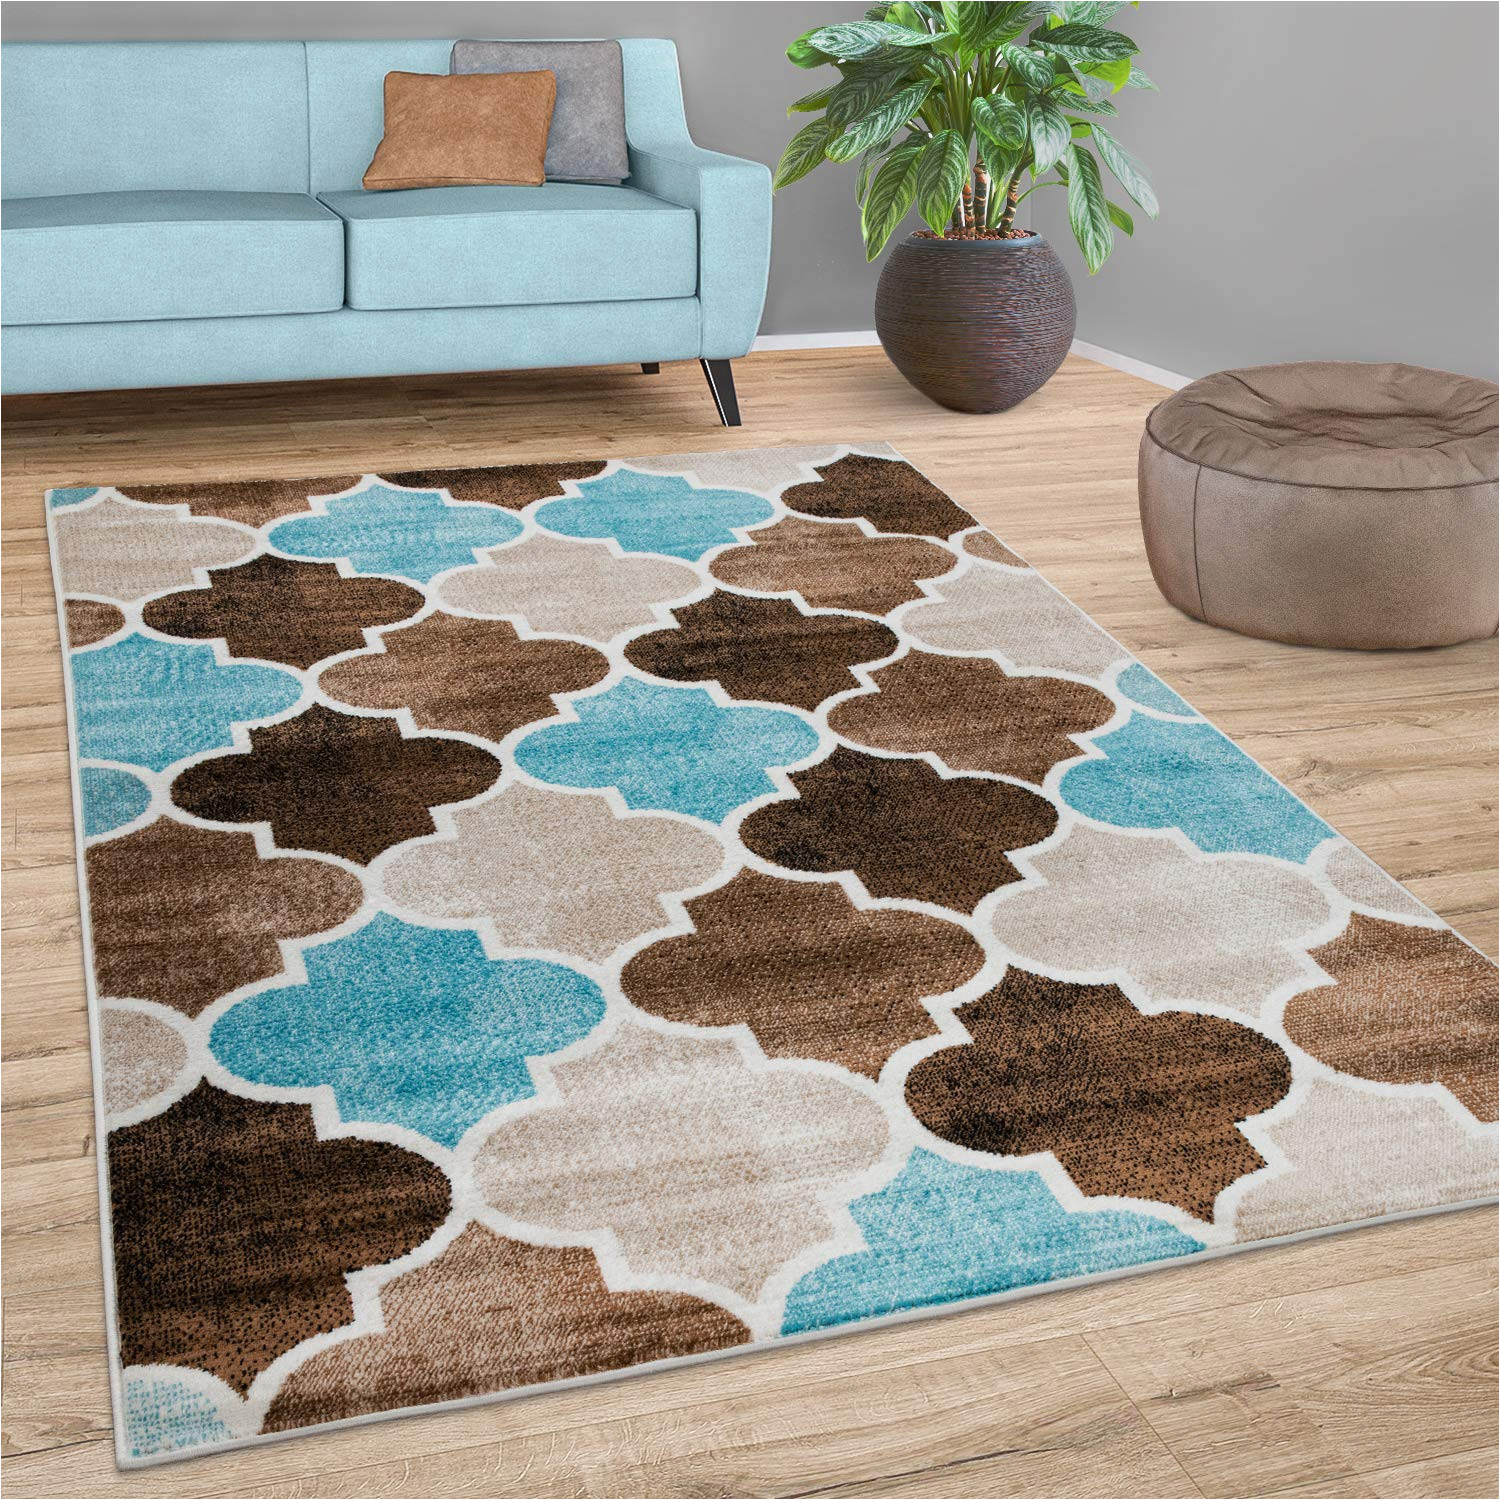 Blue and Brown Rugs Amazon Amazon.com: Colorful area Rug for Living Room with Modern Moroccan …